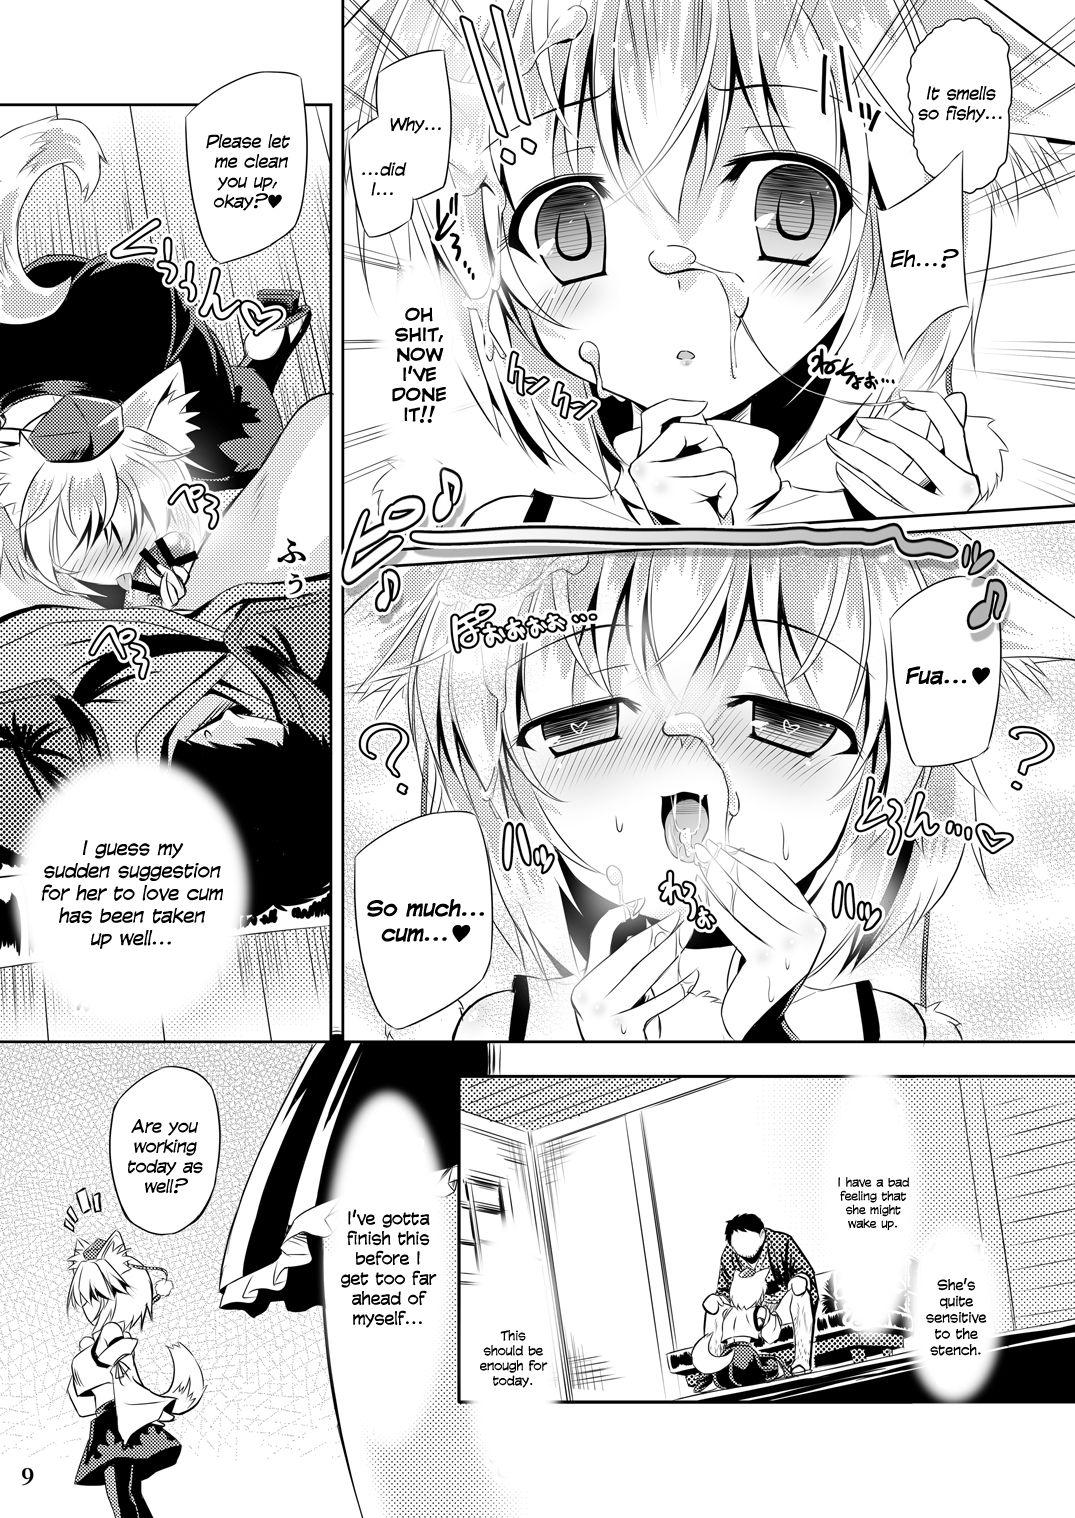 Perfect Pussy Tengu Hacking - Touhou project Step Dad - Page 8